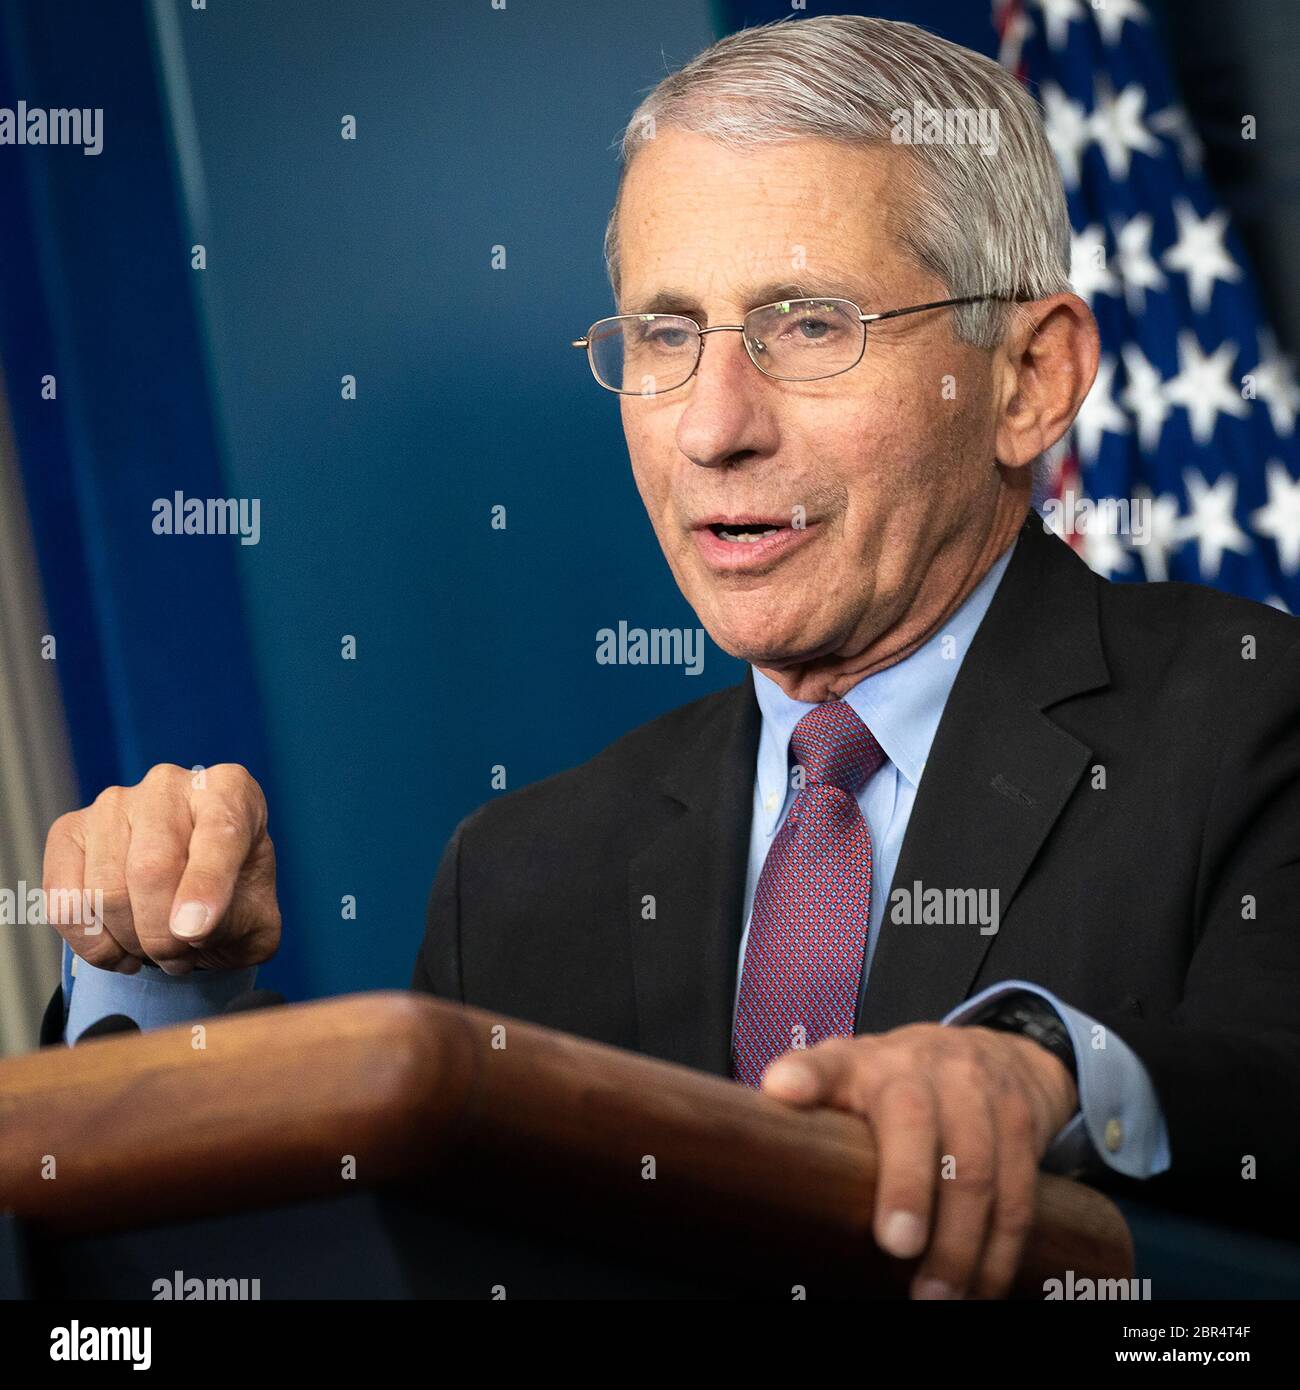 Dr. Anthony S. Fauci, Director of the National Institute of Allergy and Infectious Diseases, speaking during a coronavirus (COVID-19) briefing Wednesday, April 22, 2020, at the White House. Stock Photo